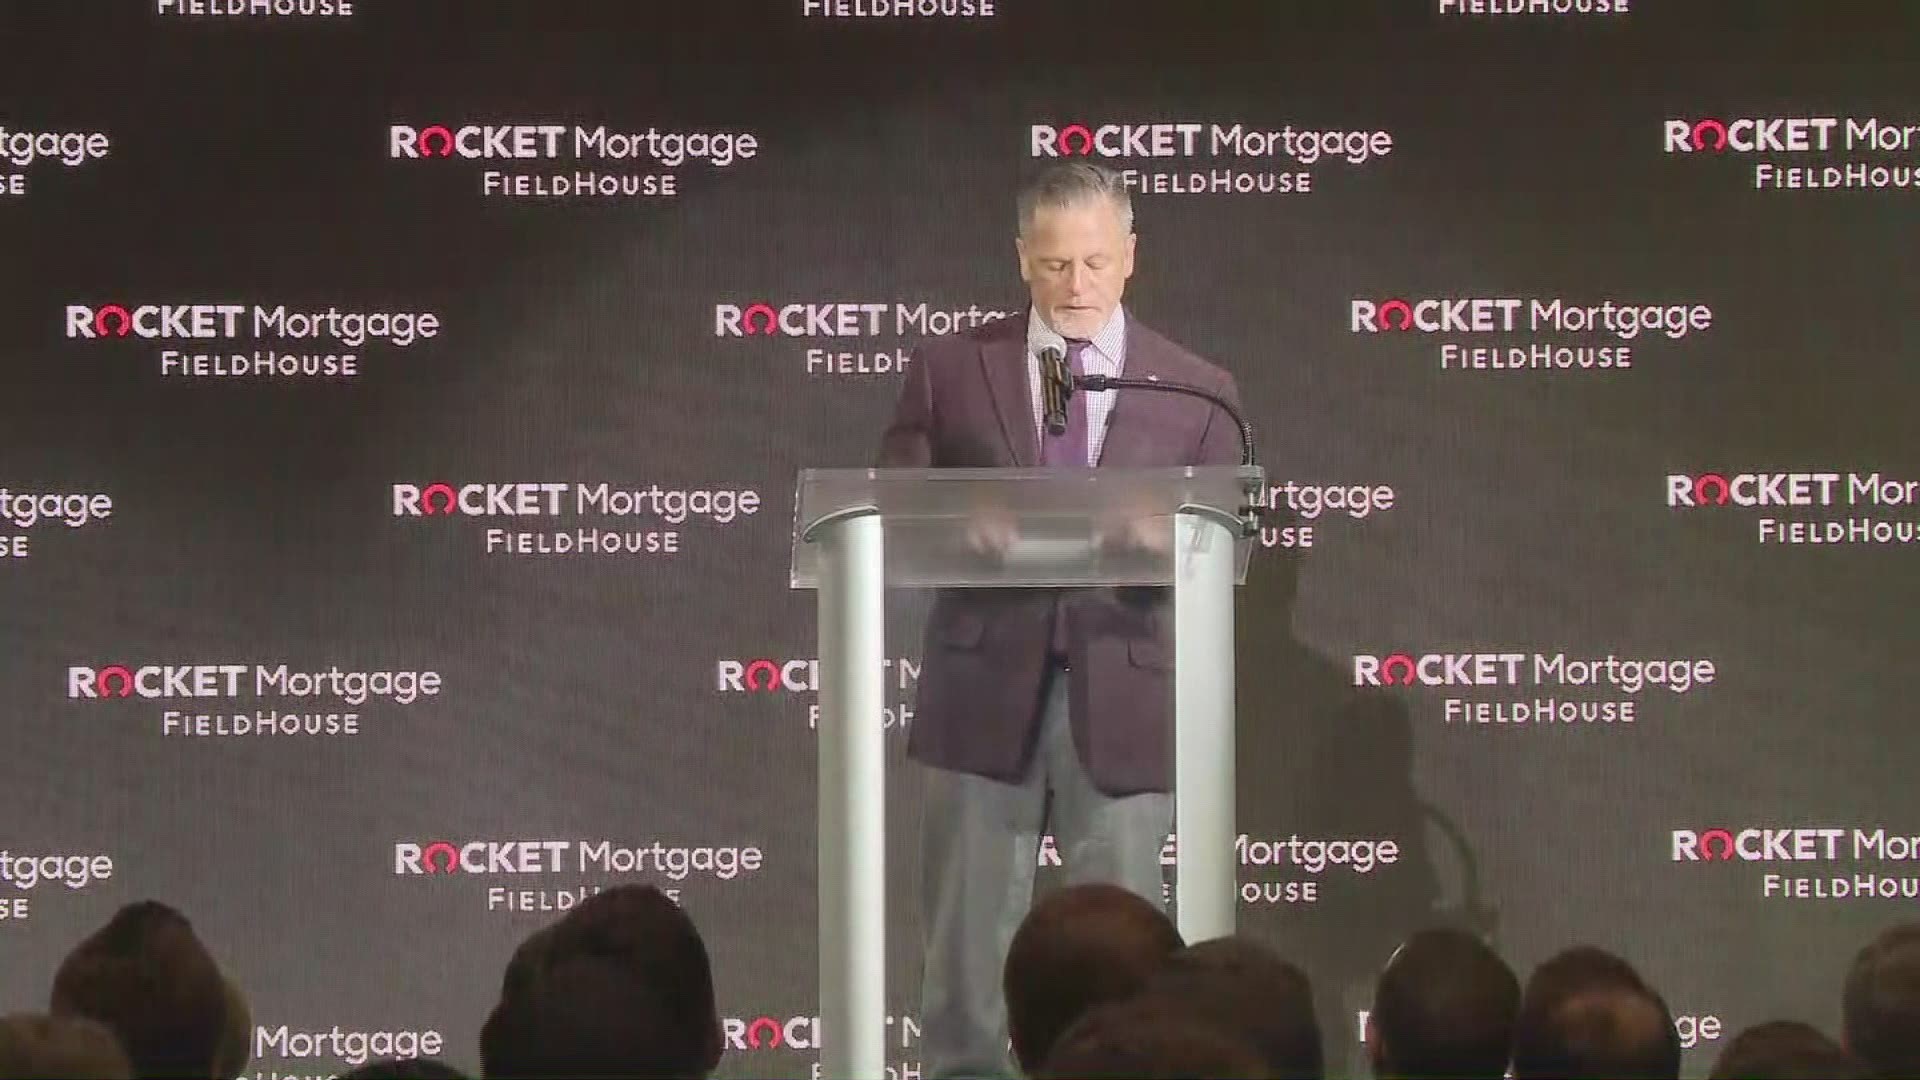 Cavs rumors: Cleveland arena to be renamed Rocket Mortgage Fieldhouse